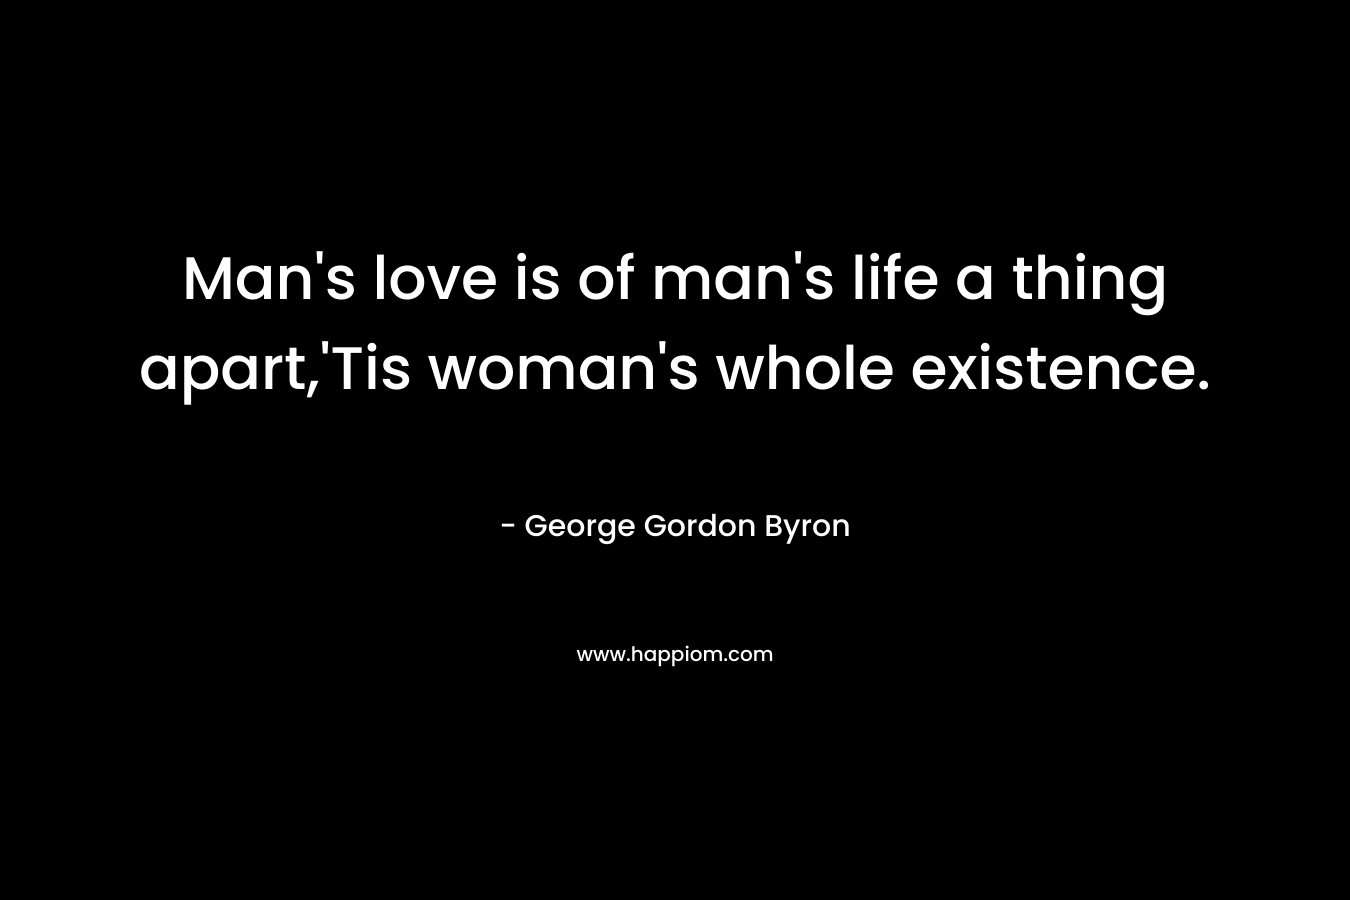 Man’s love is of man’s life a thing apart,’Tis woman’s whole existence. – George Gordon Byron